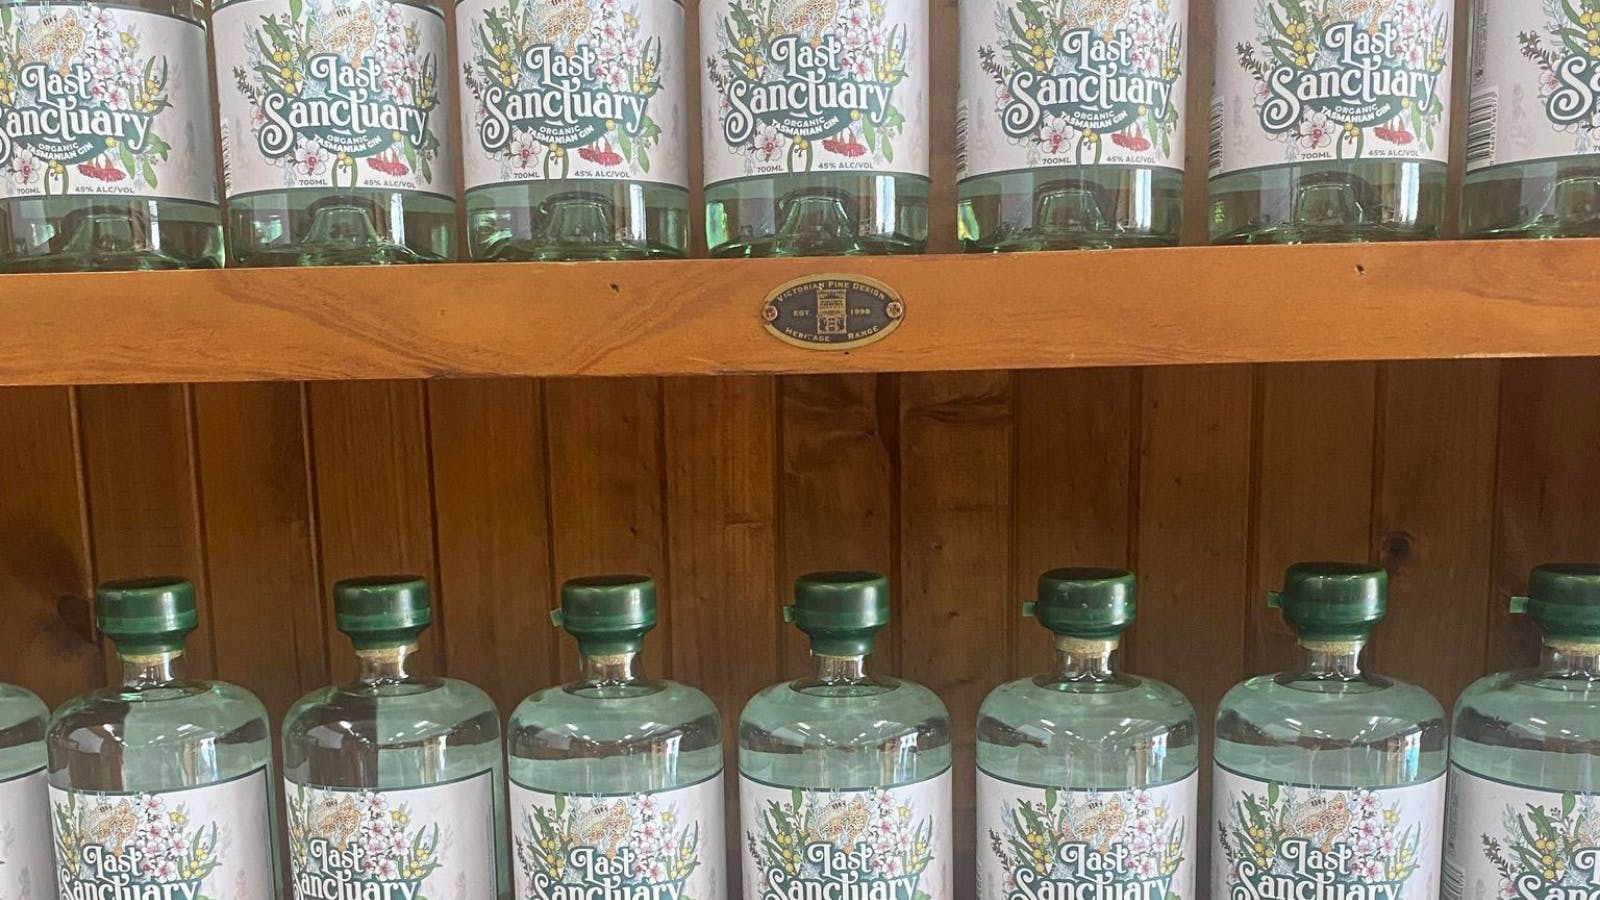 Come along and taste our organic Last Sanctuary Gin. Made using botanicals foraged from our site.